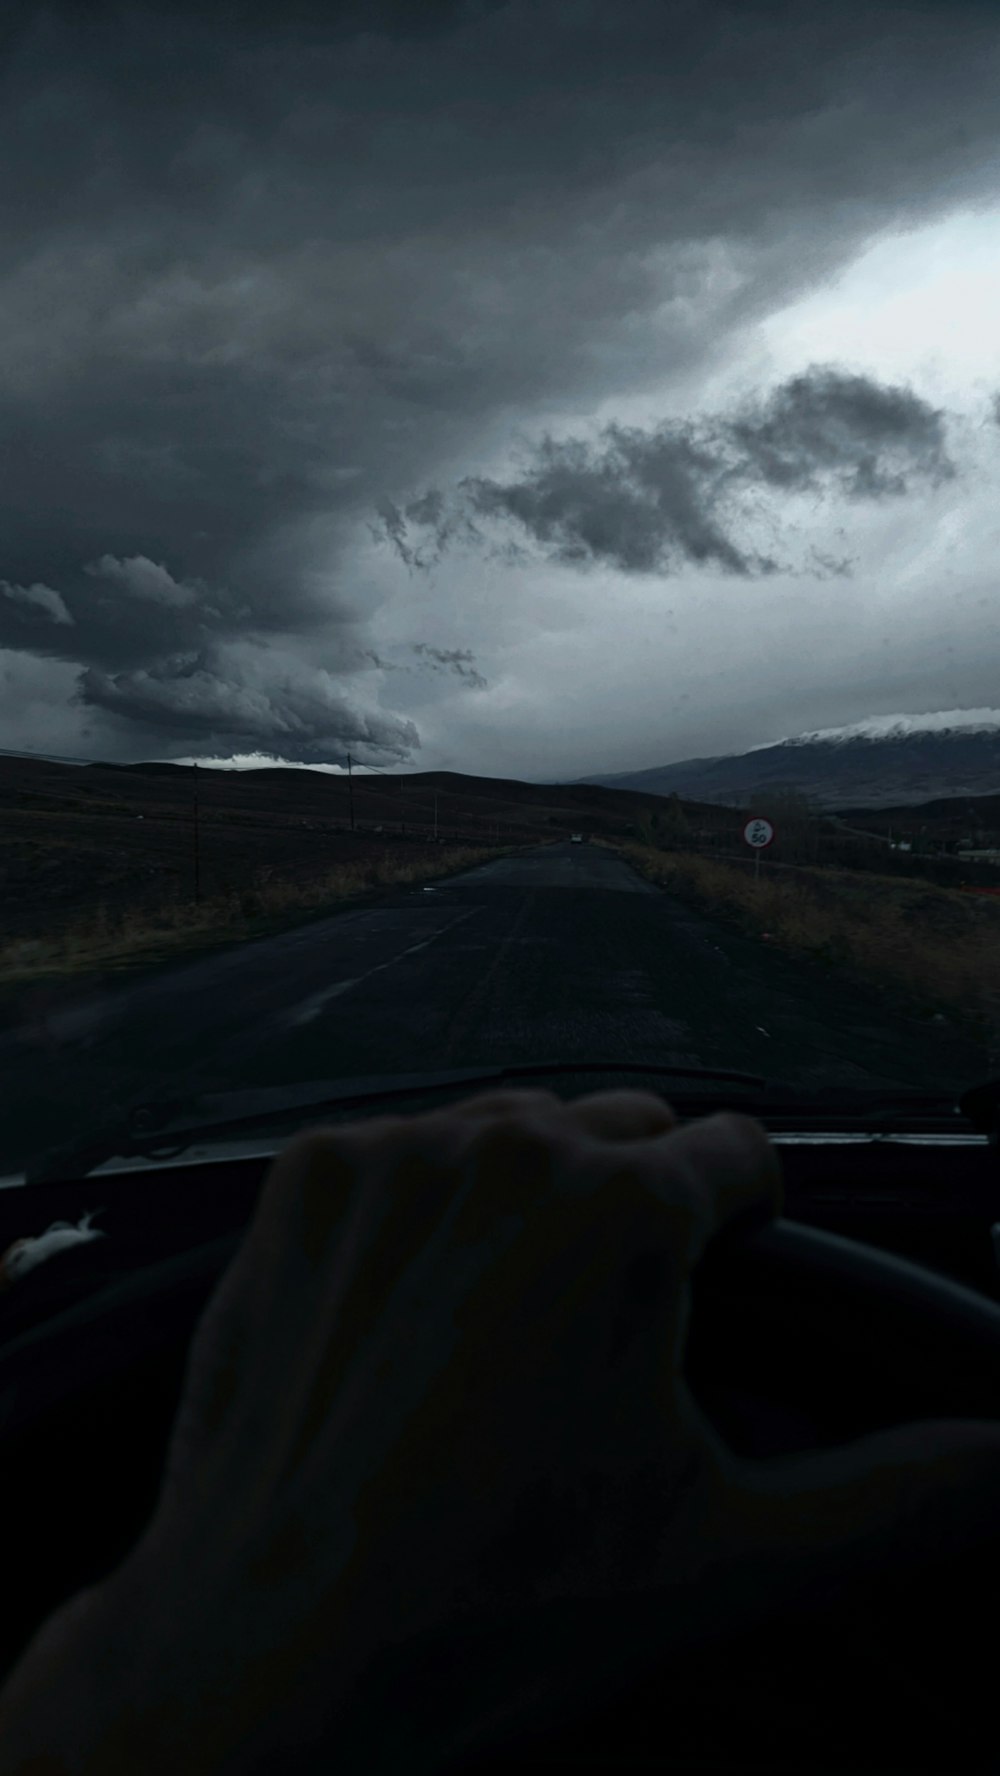 a person driving a car on a road under a cloudy sky